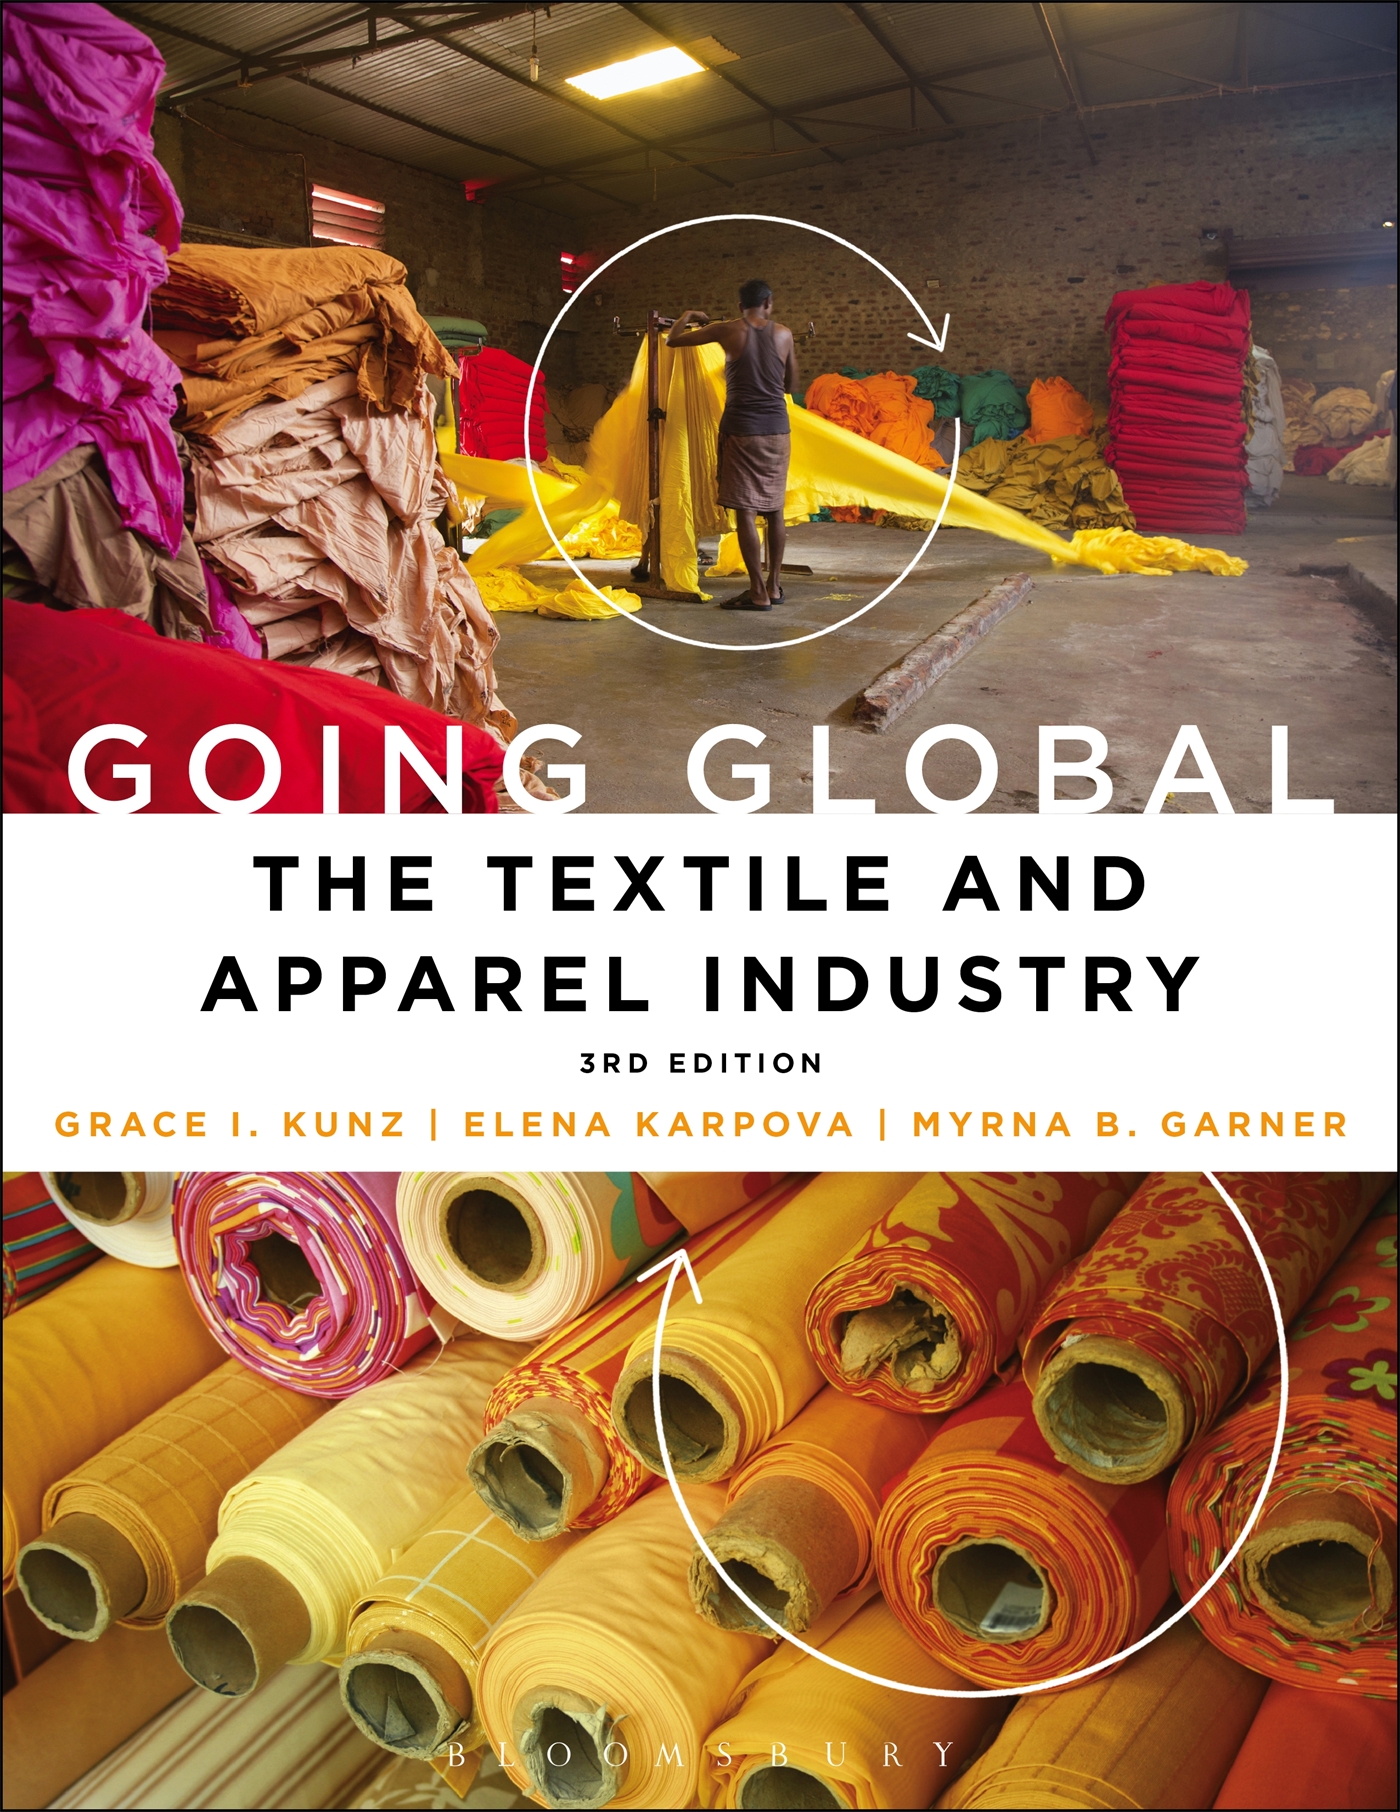 Going global the textile and apparel industry